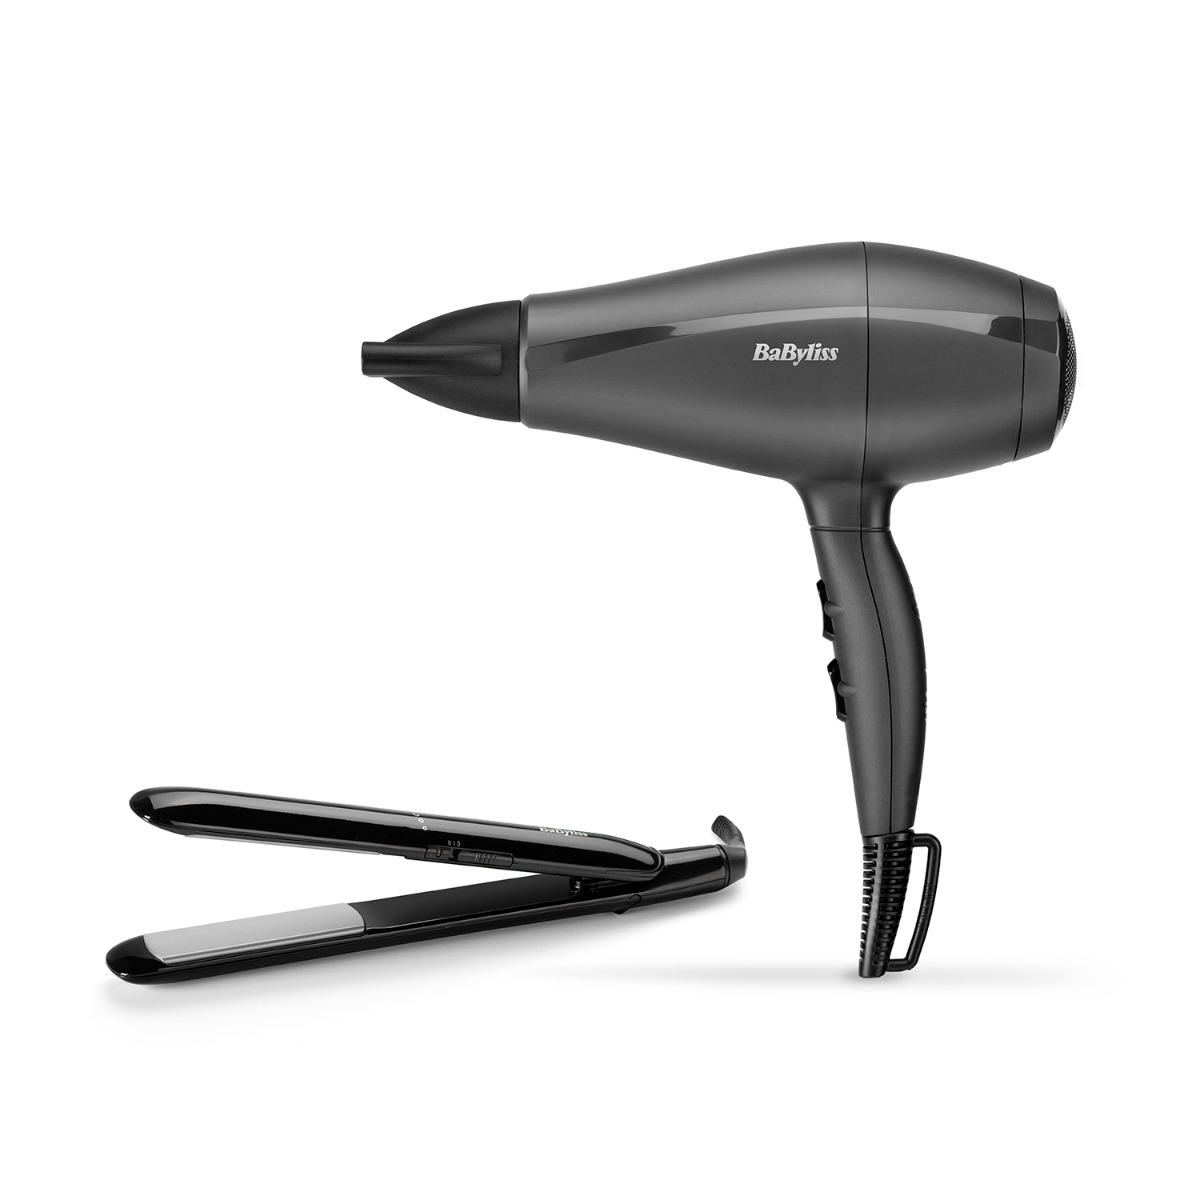 Babyliss Hair Dryer, 2000W, 3 Temperatures, Black - 5910E with Babyliss Smooth Glide 230 Hair Straightener, Black - ST240E